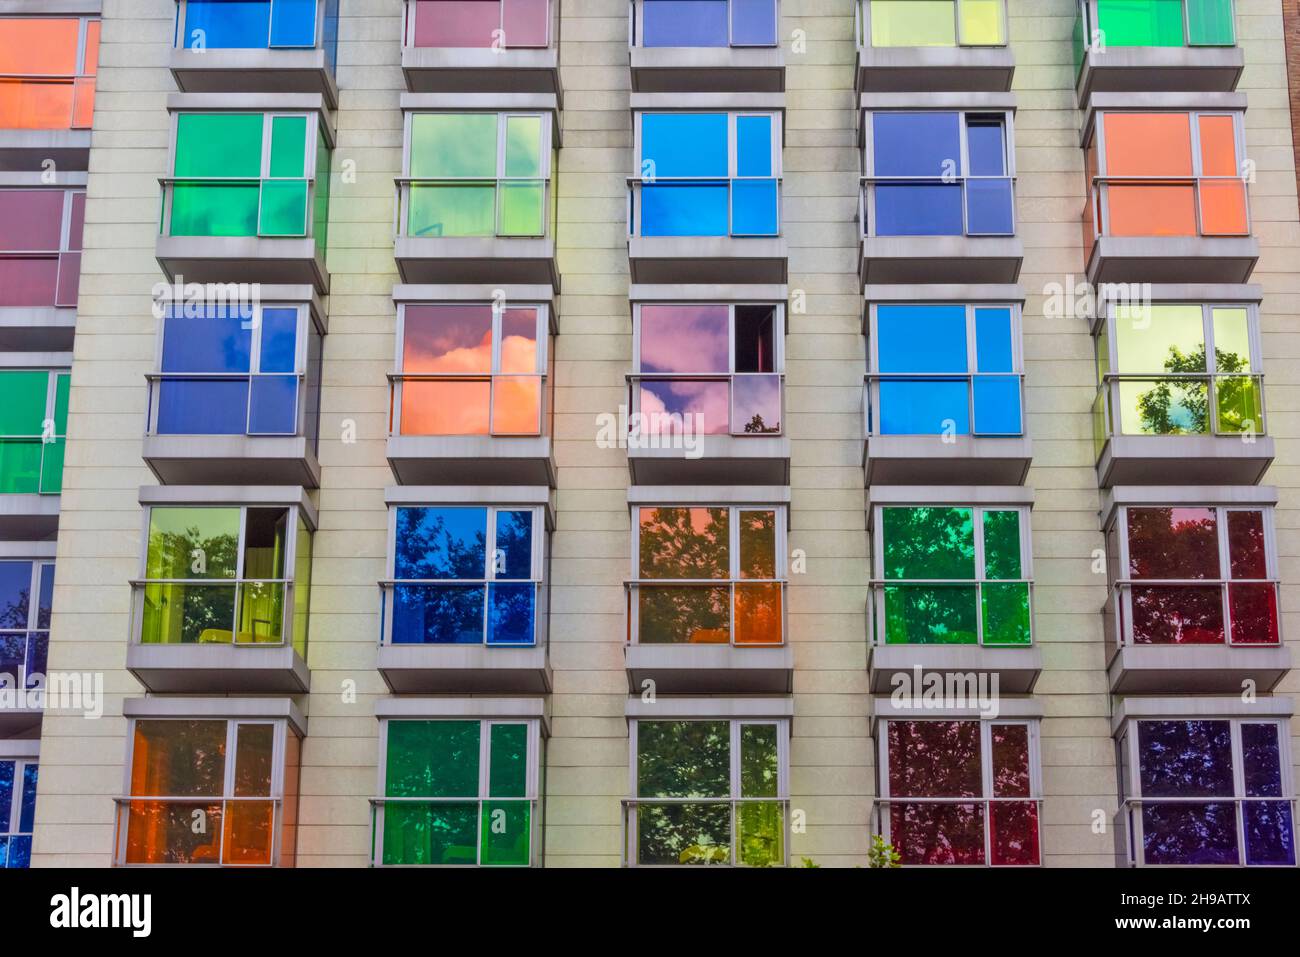 Building with colorful windows, Bilbao, Biscay Province, Basque County Autonomous Community, Spain Stock Photo